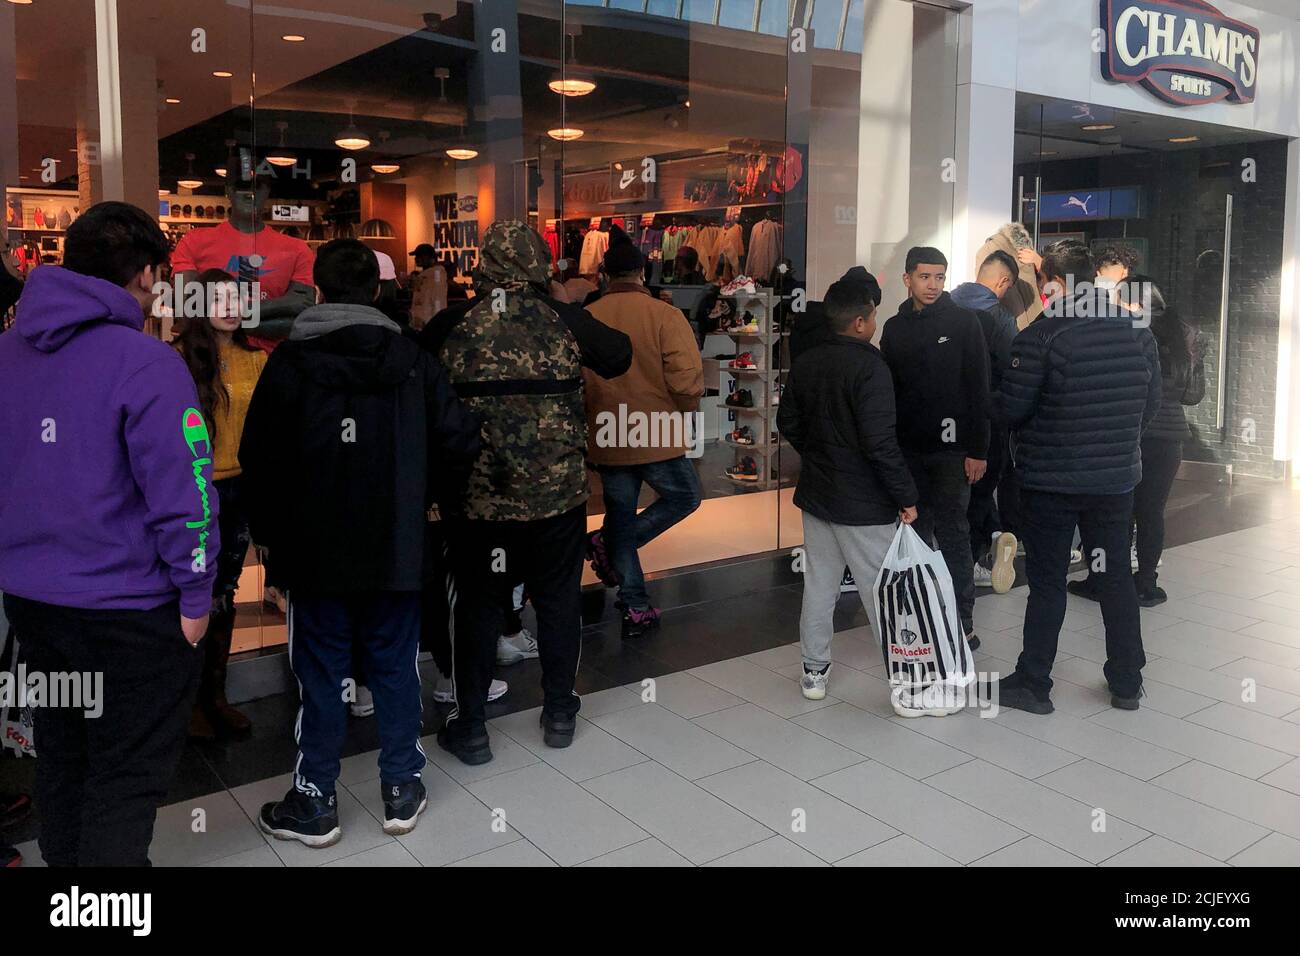 Shoppers Wait In Line To Enter The Champs Sports Retail Store During The Black Friday Sales Event At Roosevelt Field Mall In Garden City New York U S November 29 2019 Reuters Shannon Stapleton